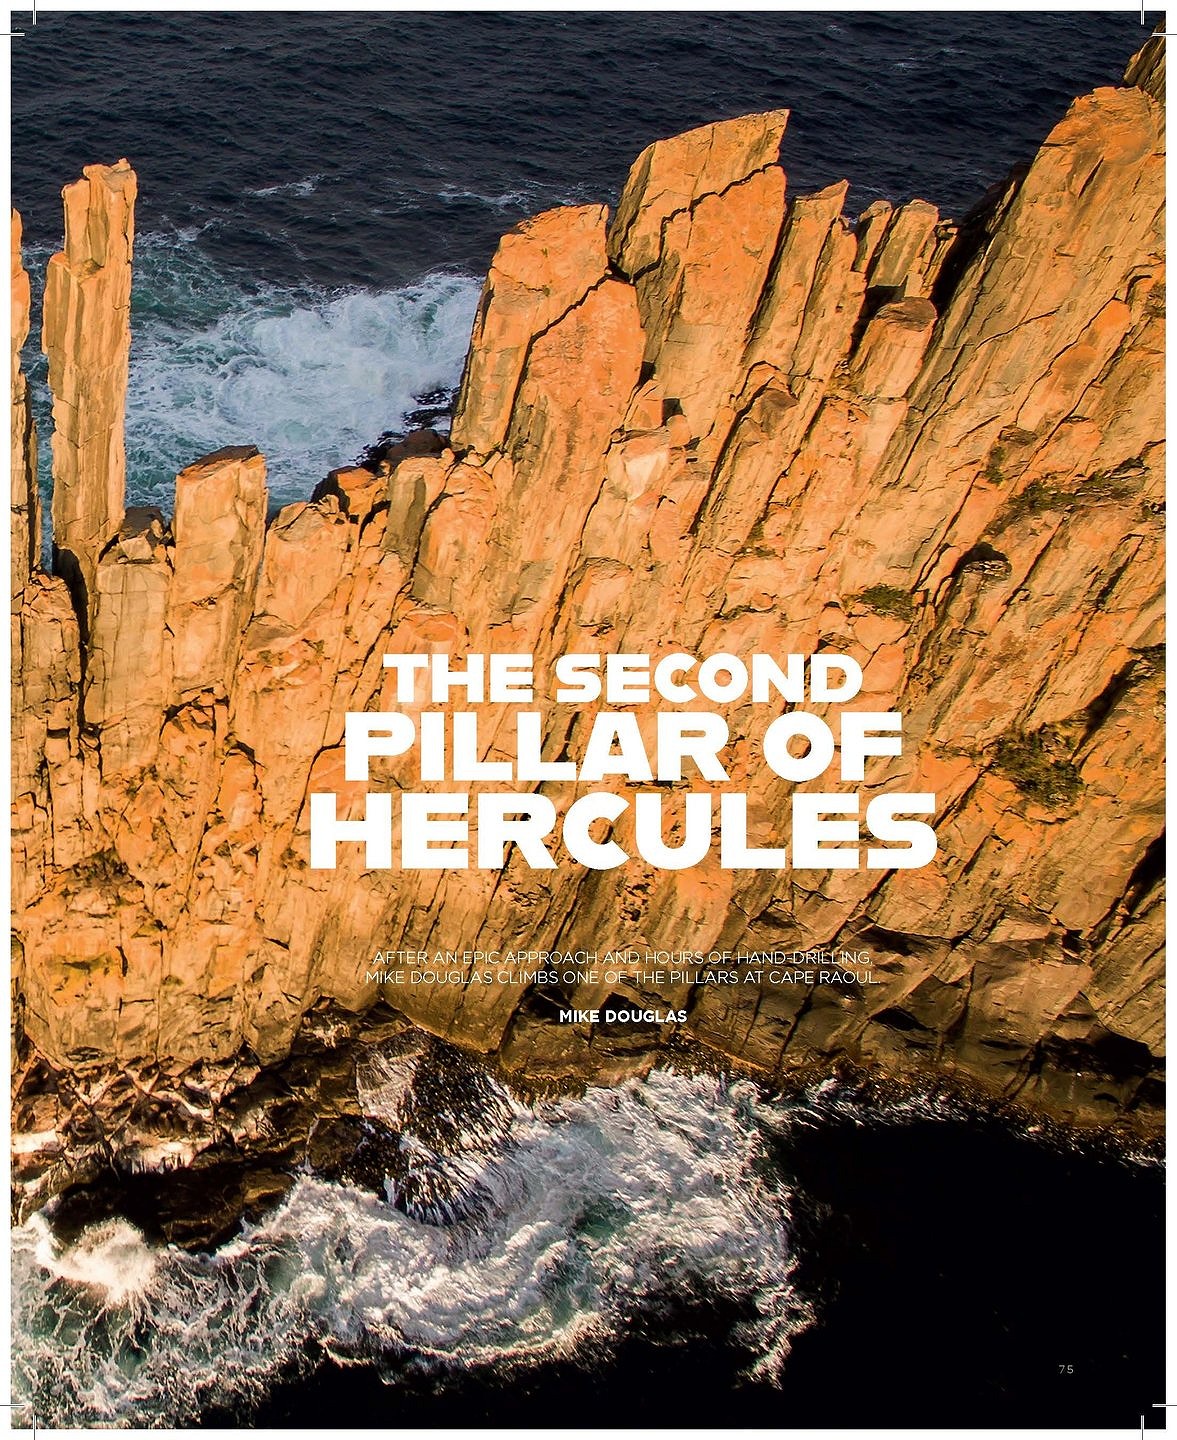 The Second Pillar of Hercules  © Adventures at the End of the World